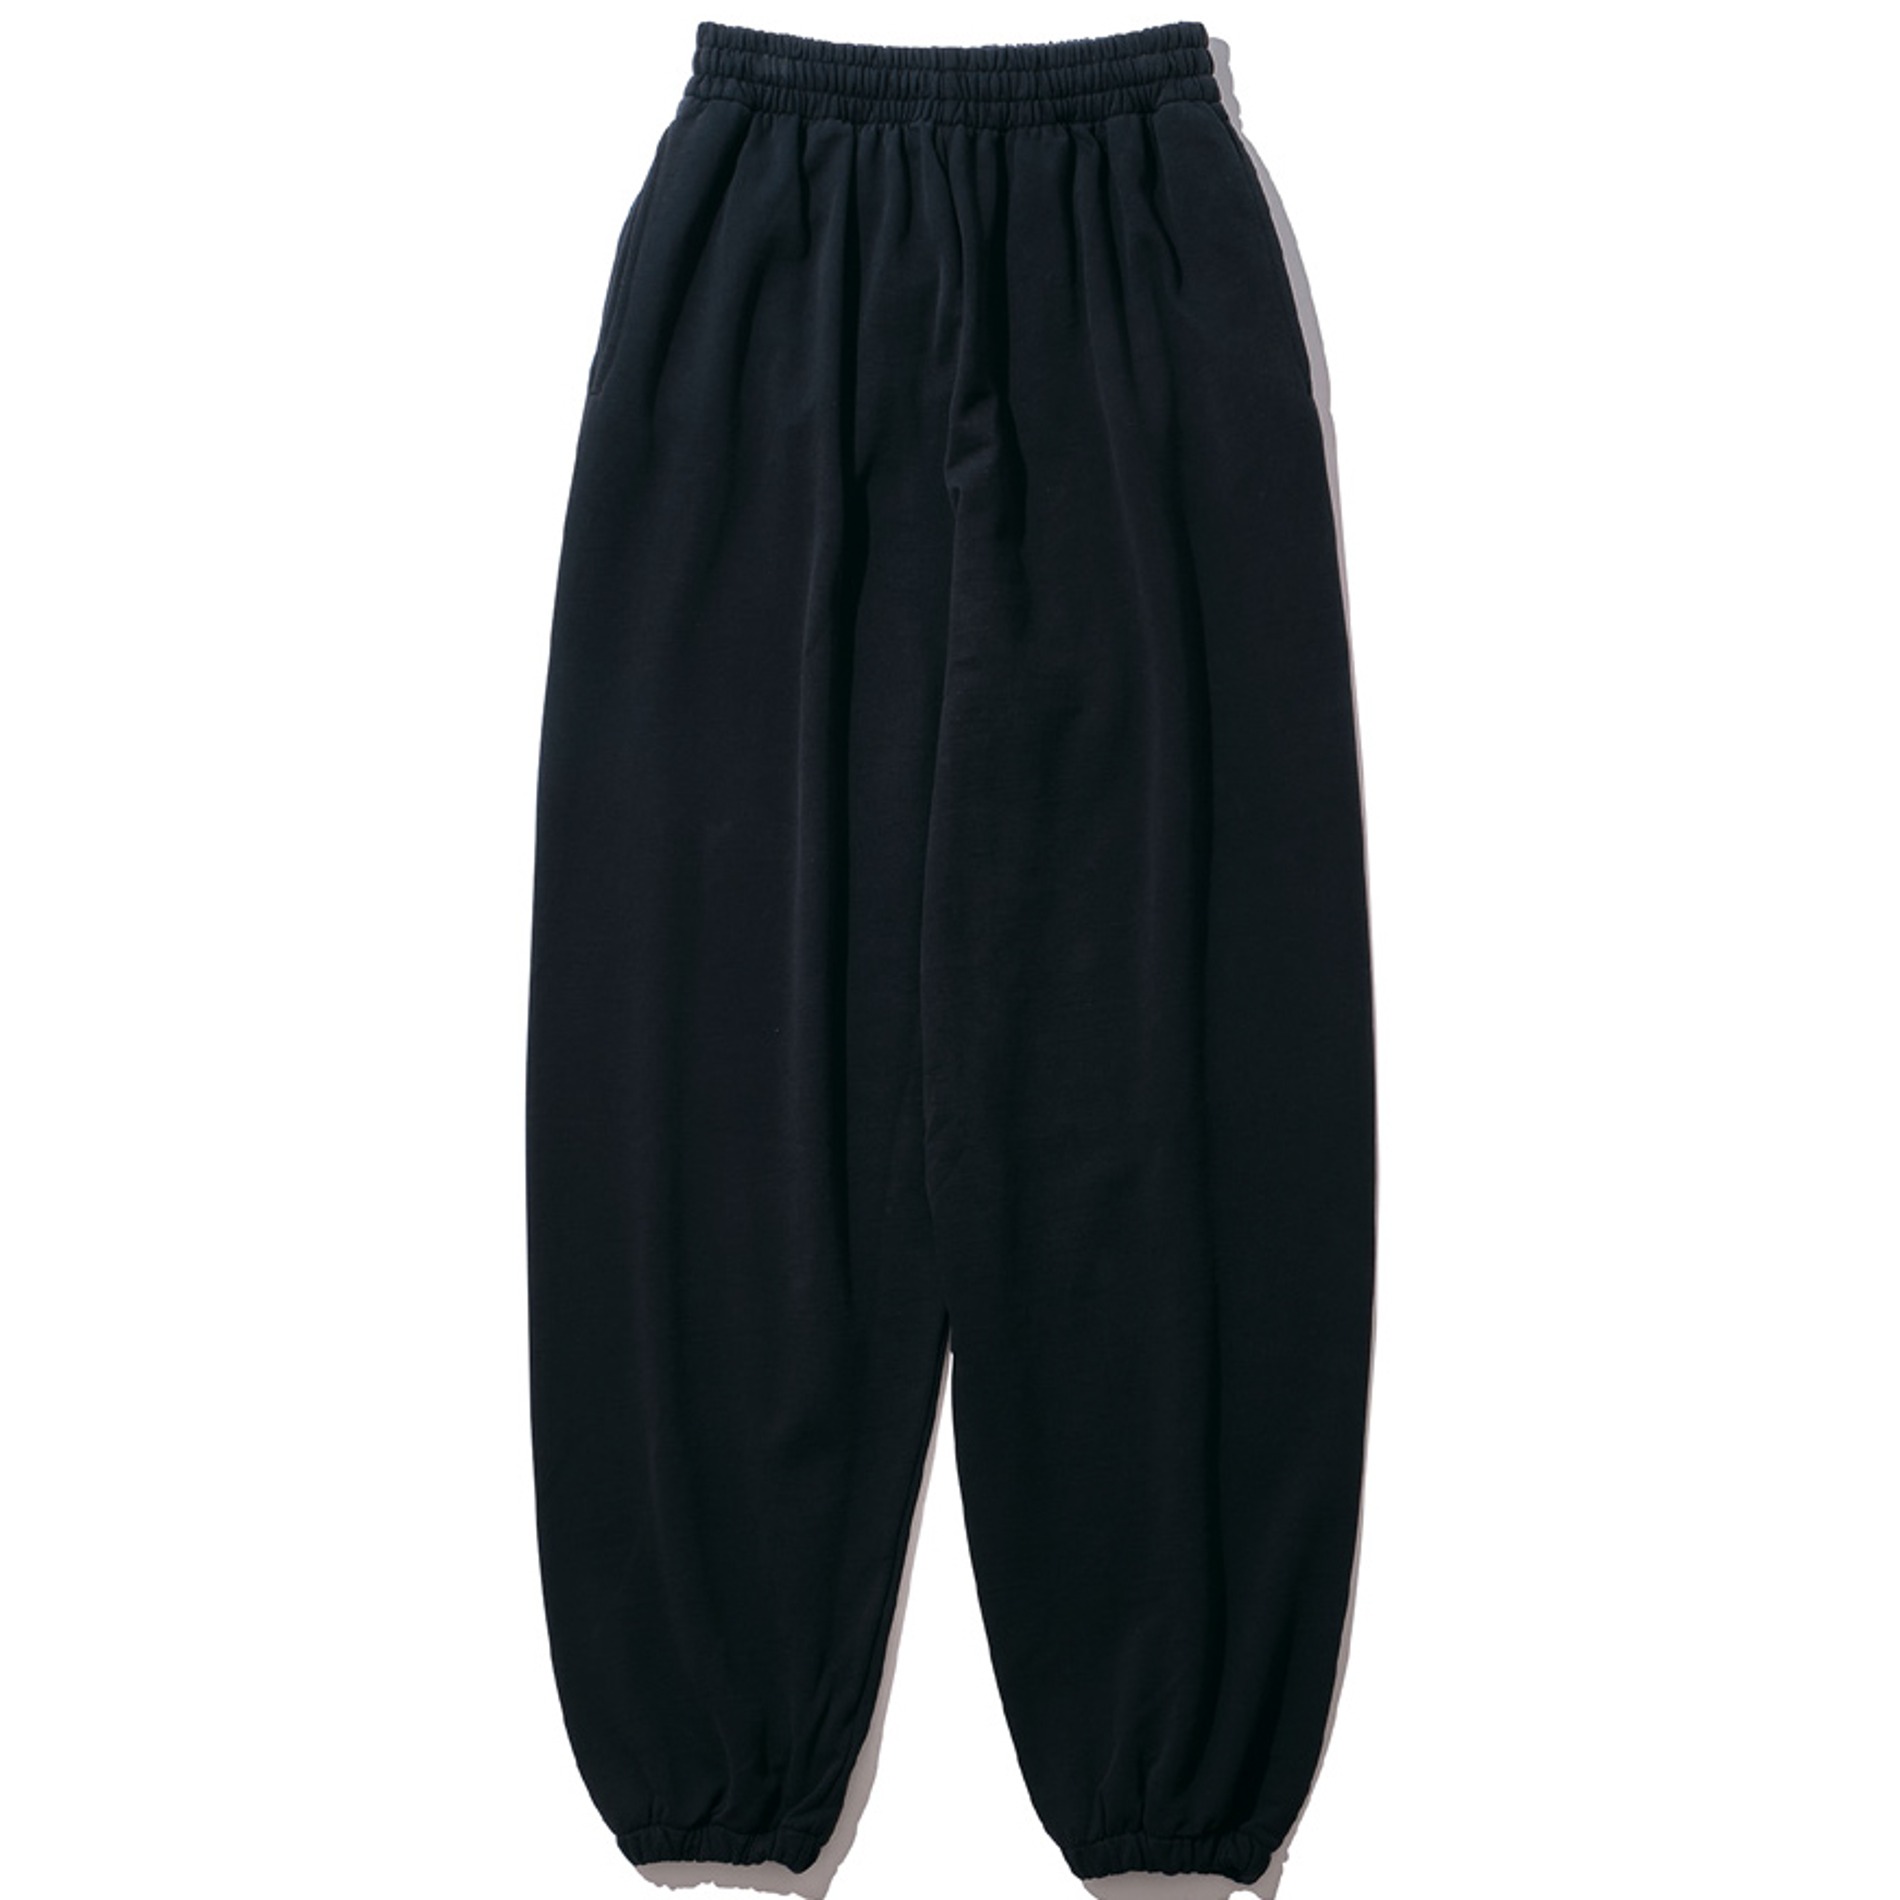 AW23 WILLY CHAVARRIA BASIC SWEAT PANT BLACK